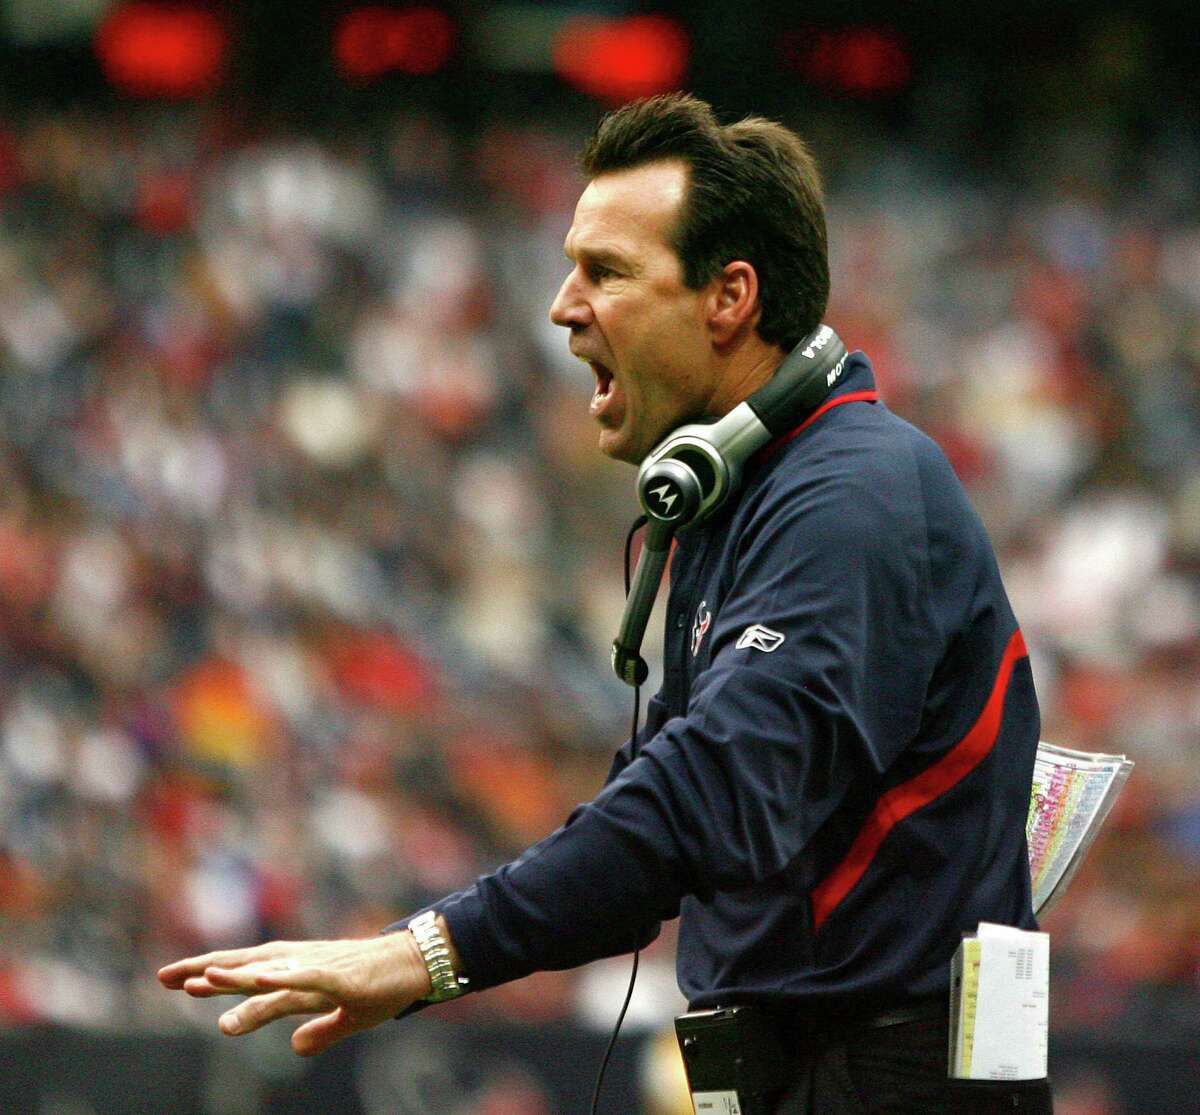 Texans head coach Gary Kubiak yells instructions in the second quarter against the Seattle Seahawks in 2009 at Reliant Stadium in Houston.